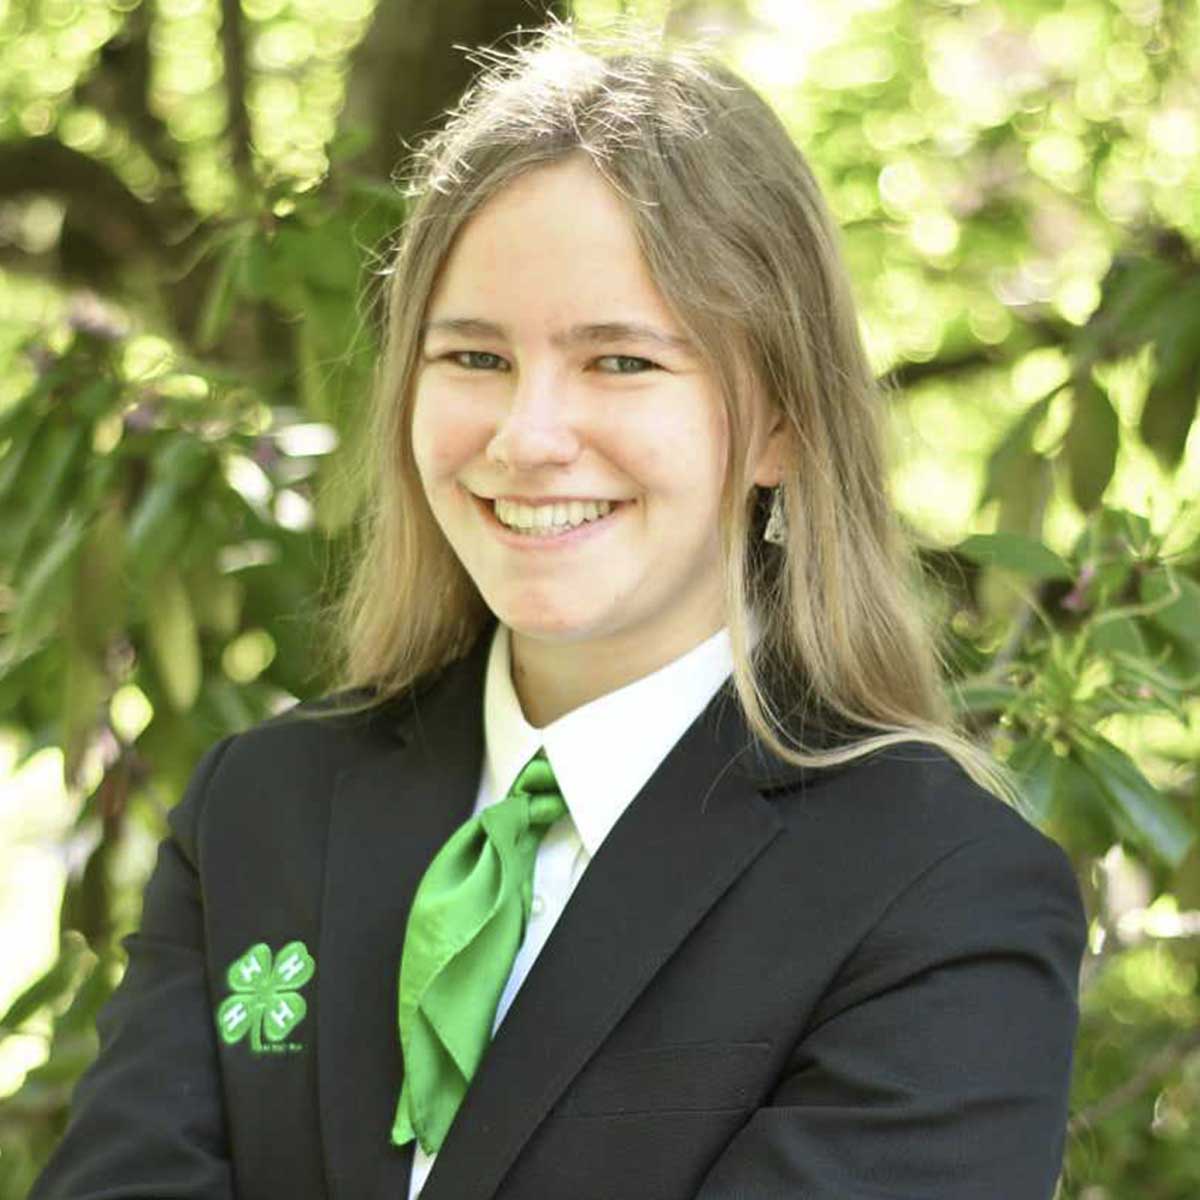 Portrait of a female in 4-H clothing.